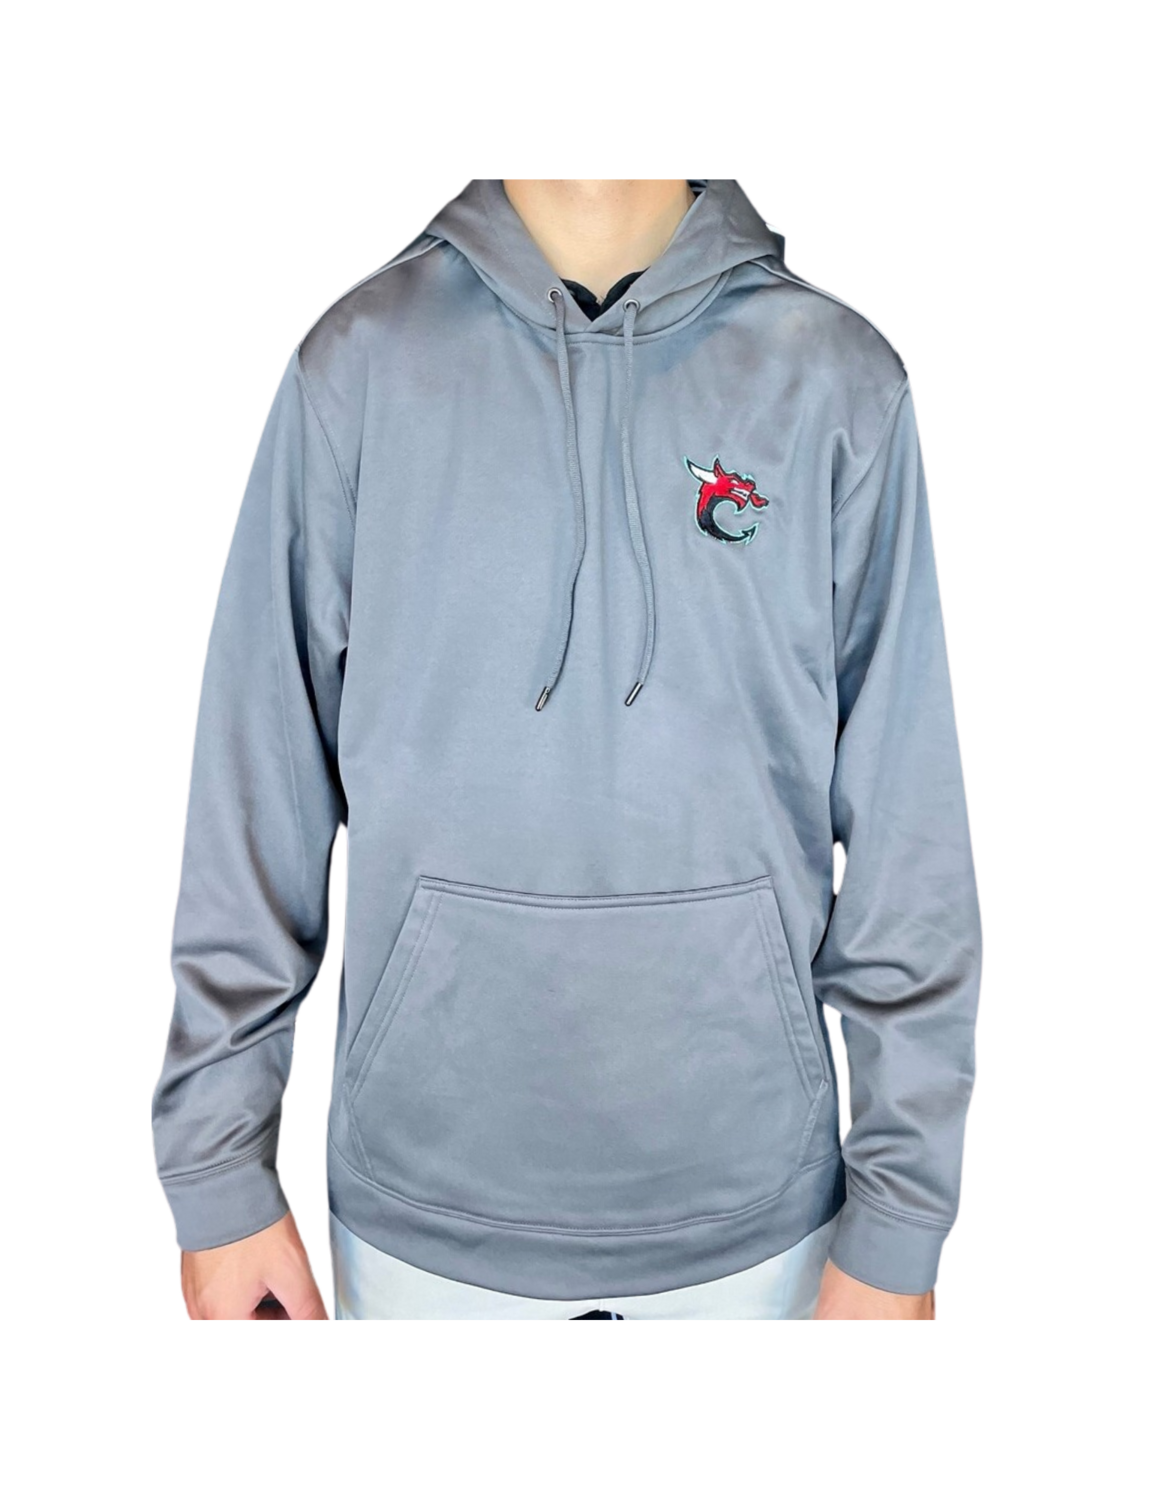 C Logo Grey Sport-Wick Embroidered Hoodie